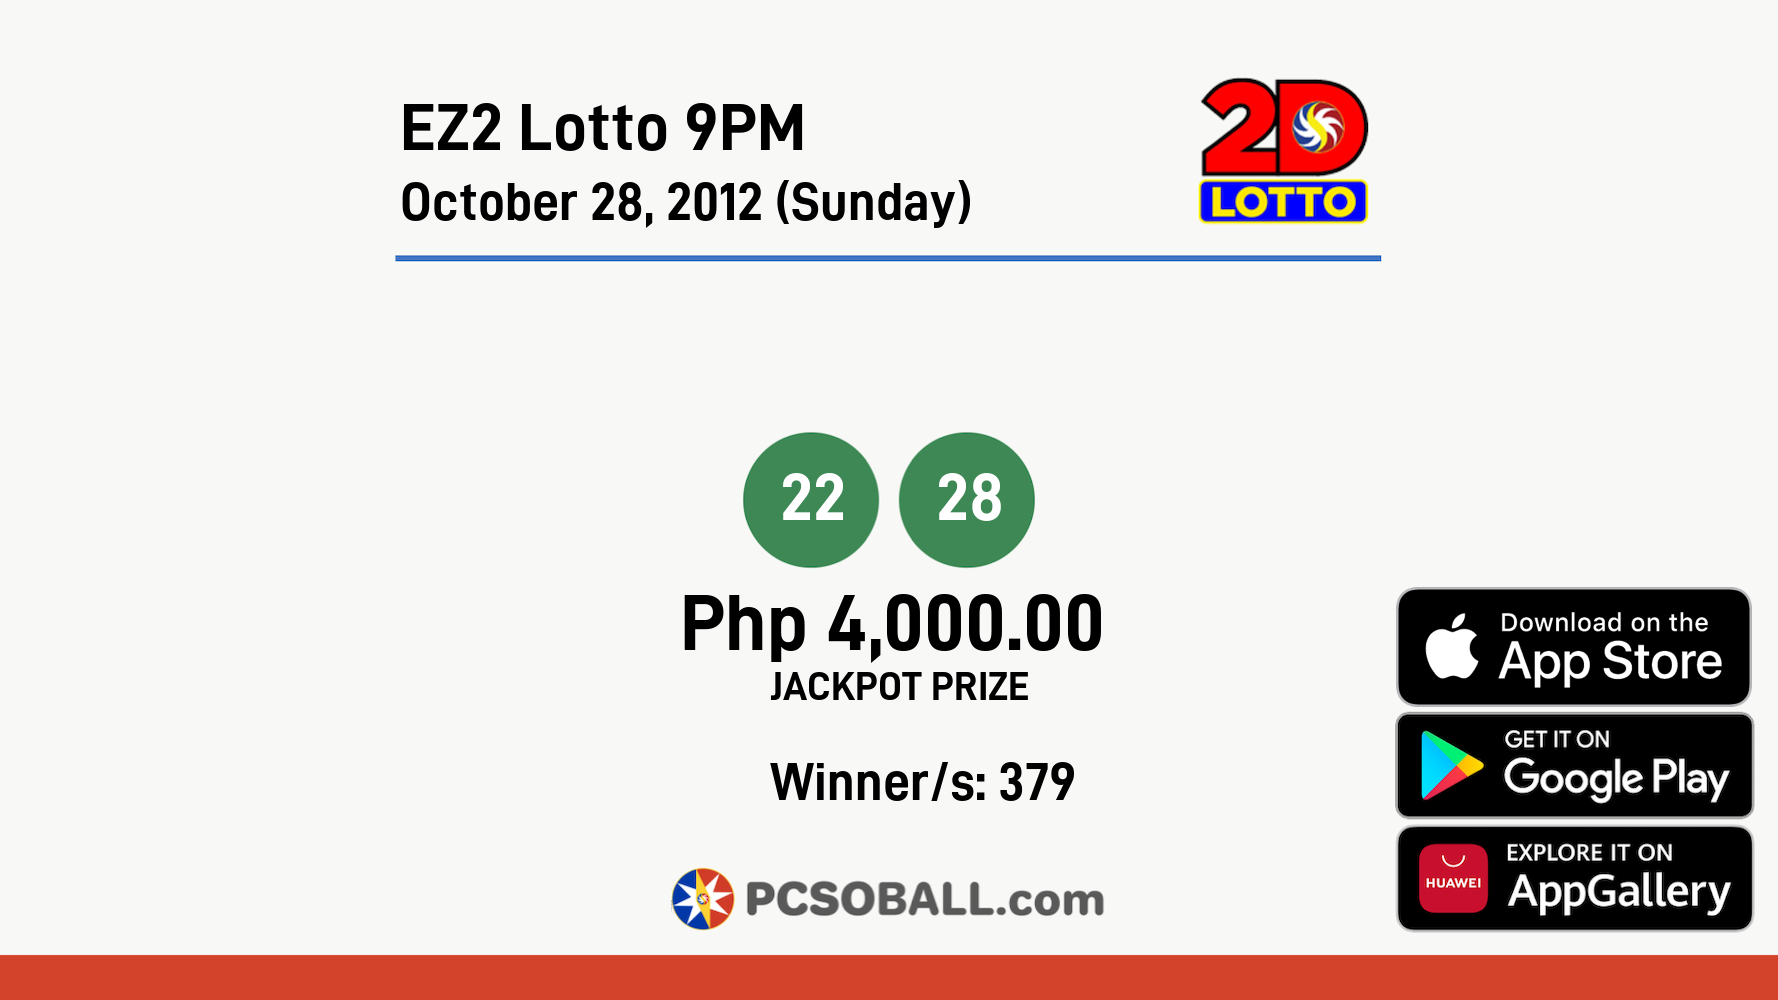 EZ2 Lotto 9PM October 28, 2012 (Sunday) Result